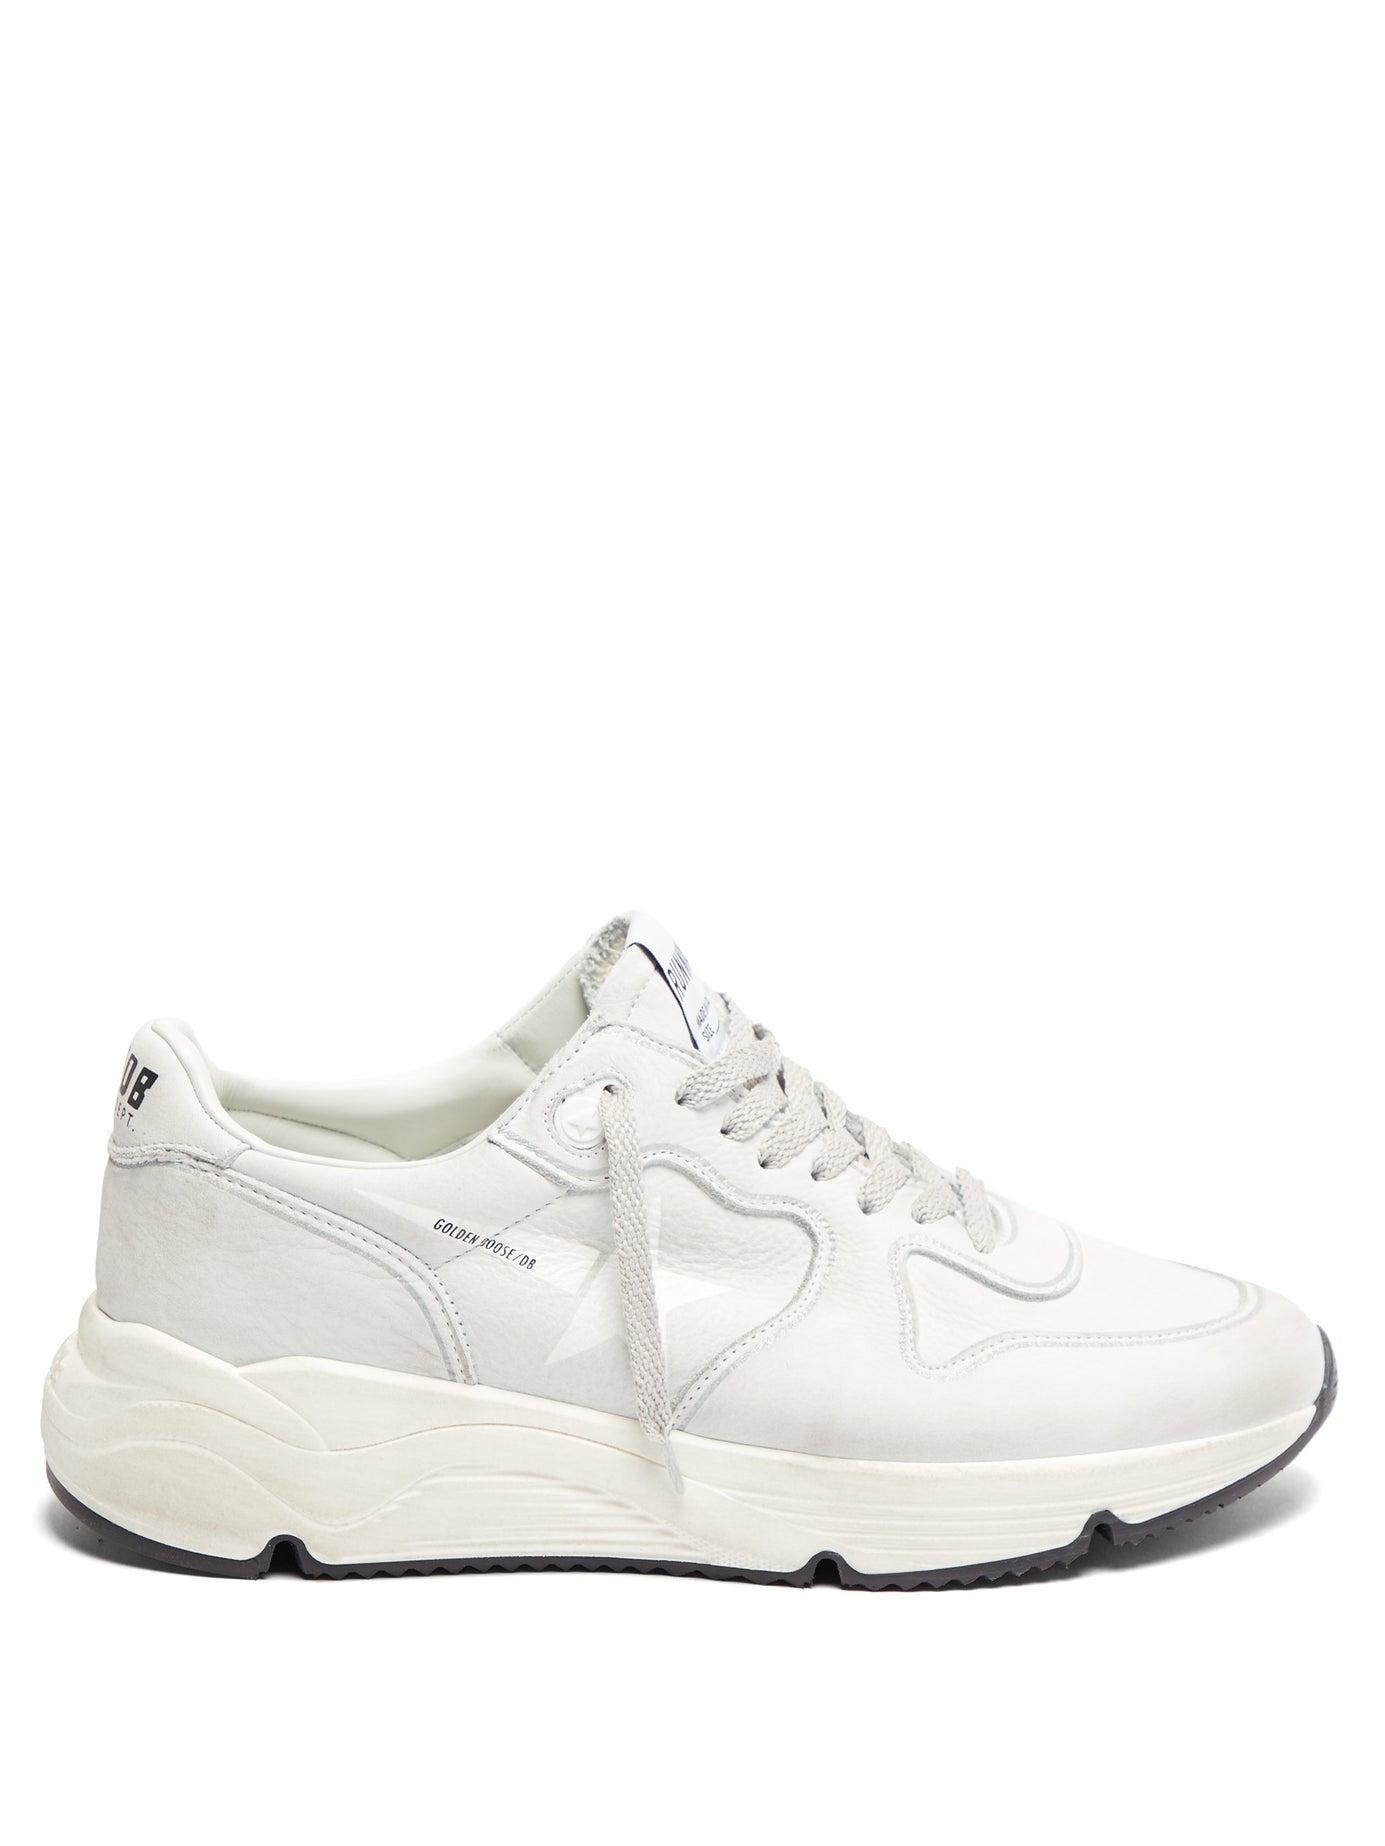 Golden Goose Deluxe Brand Running Sole Low-top Leather Trainers in ...